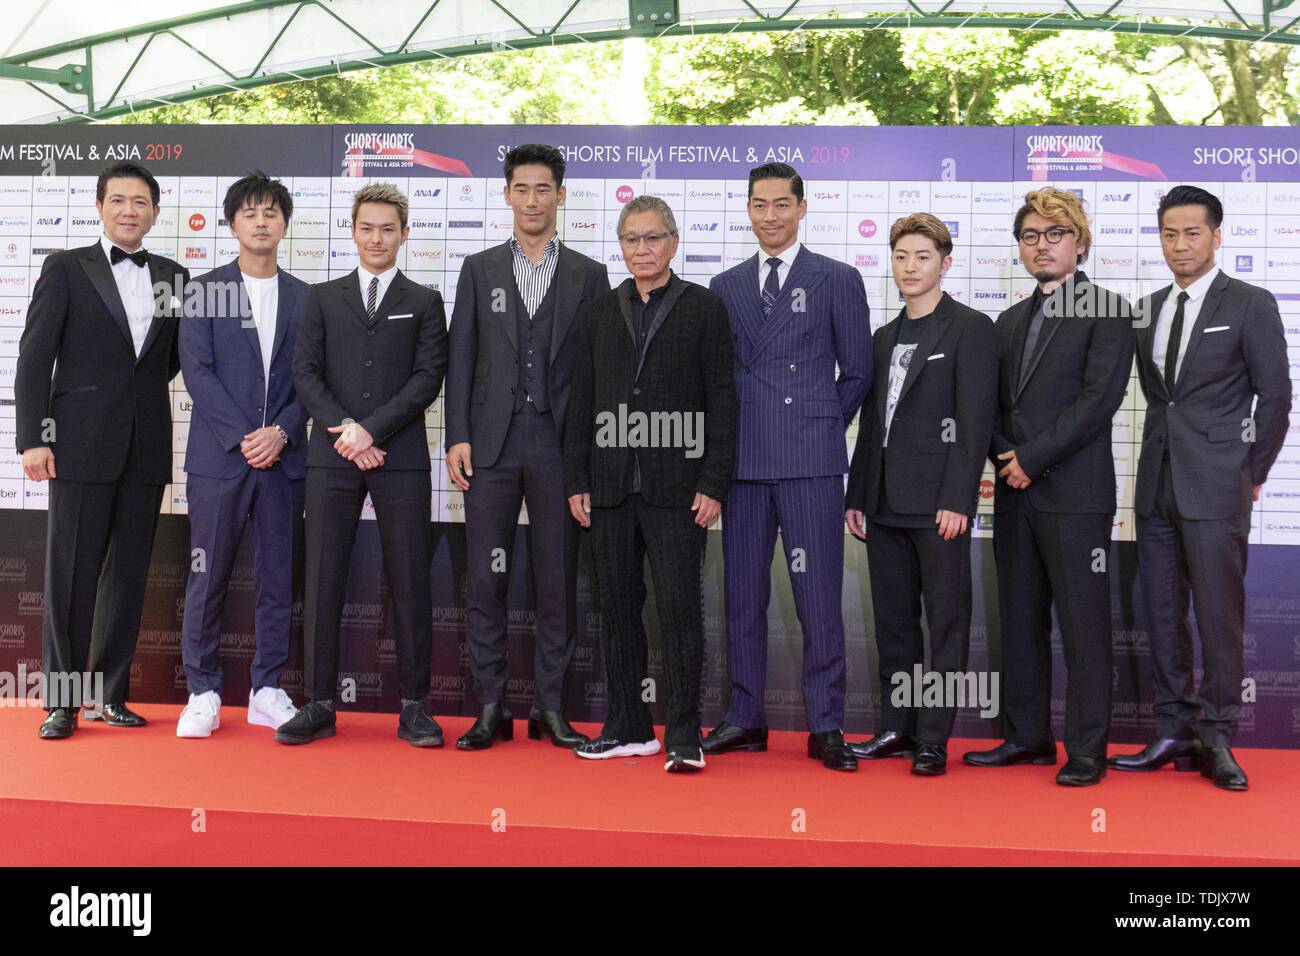 June 16, 2019 - Tokyo, Japan - (L to R) Tetsuya Bessho president of the Short Shorts Film Festival & Asia 2019 (SSFF & Asia, Hiroki Inoue, singer Ryuji Imaichi, actor Naoki Kobayashi, filmmaker Takashi Miike, Akira (Exile), dancer Reo Sano, director Hiroki Horanai and Hiro (Exile), pose for the cameras on the red carpet during the Award Ceremony at Jingu Kaikan. The SSFF & Asia is one of the largest international short film festivals in Asia held in Tokyo from May 29 to June 16. For the first time, the four winners of this years' festival will become eligible for the 2020 Academy Awards (Oscar Stock Photo